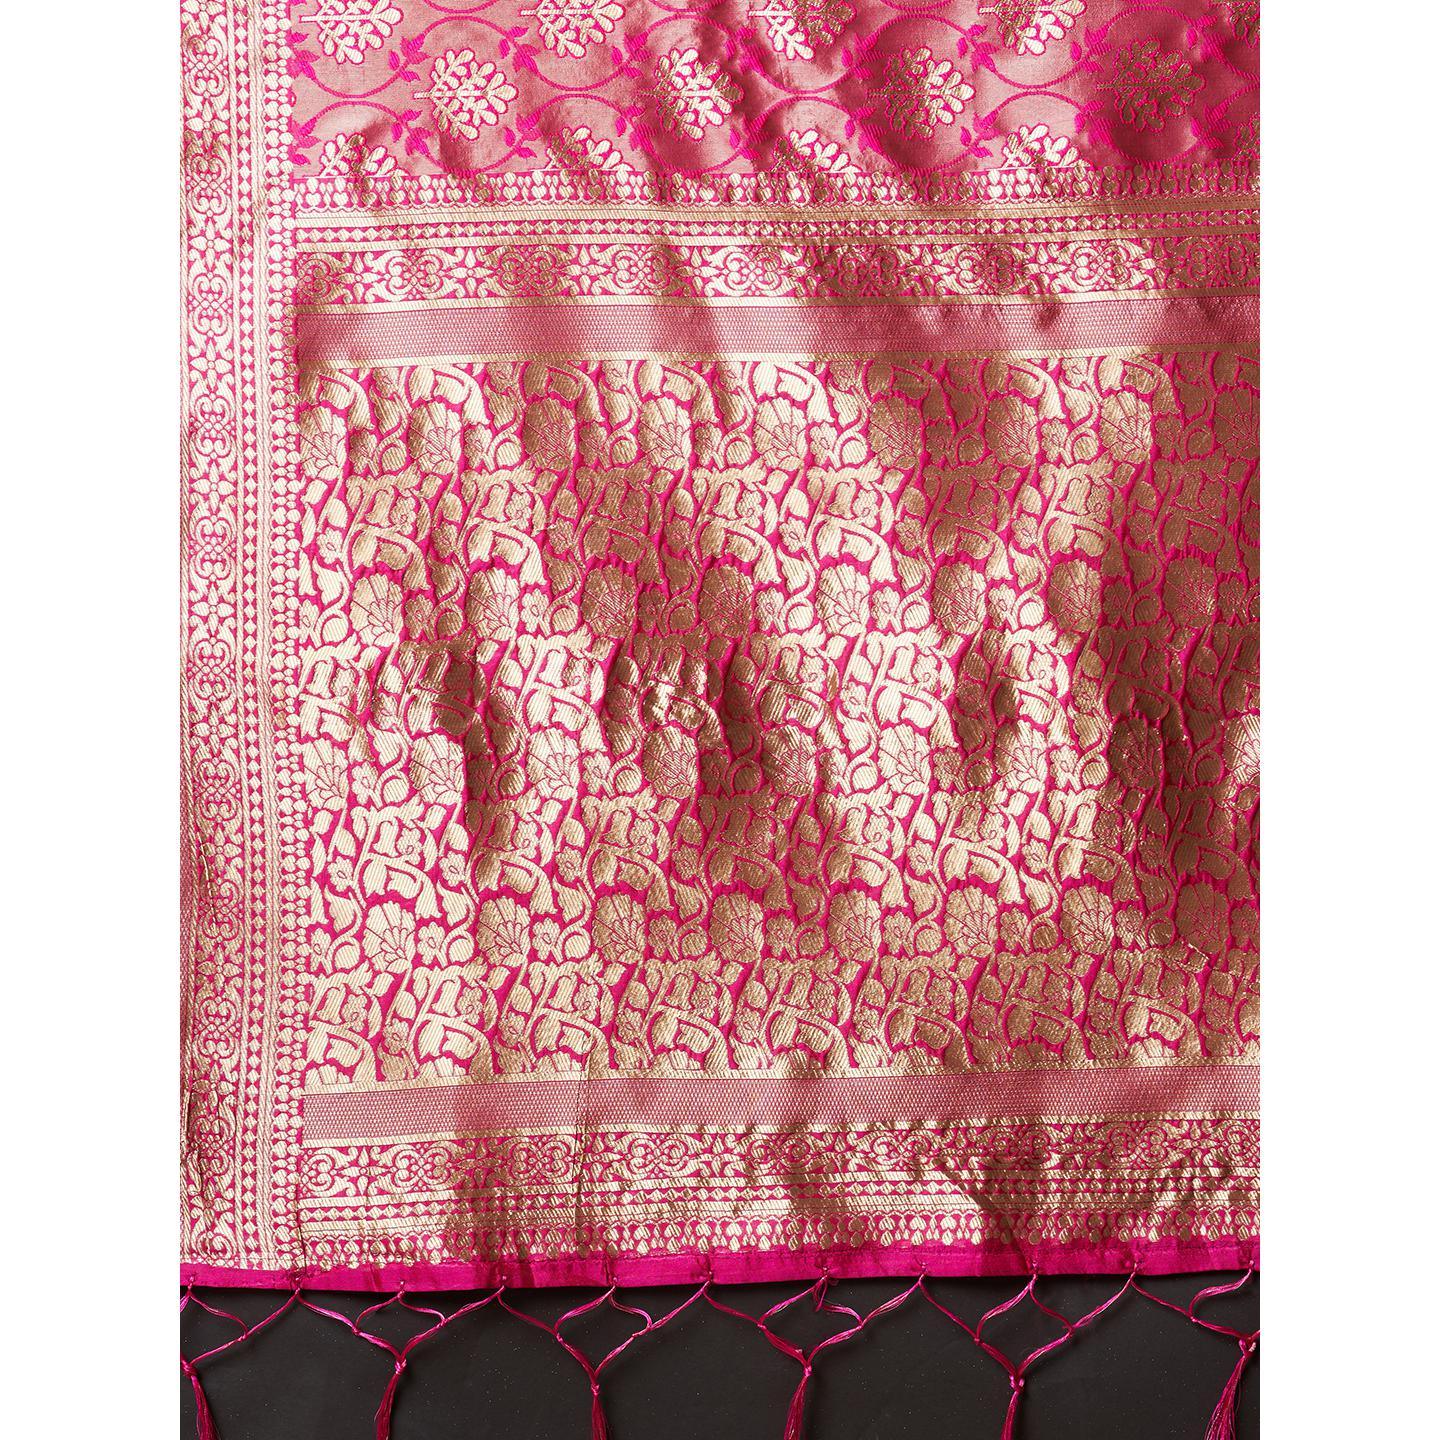 Saree Mall Pink Festive Wear Silk Blend Woven Floral Designer Saree With Unstitched Blouse - Peachmode